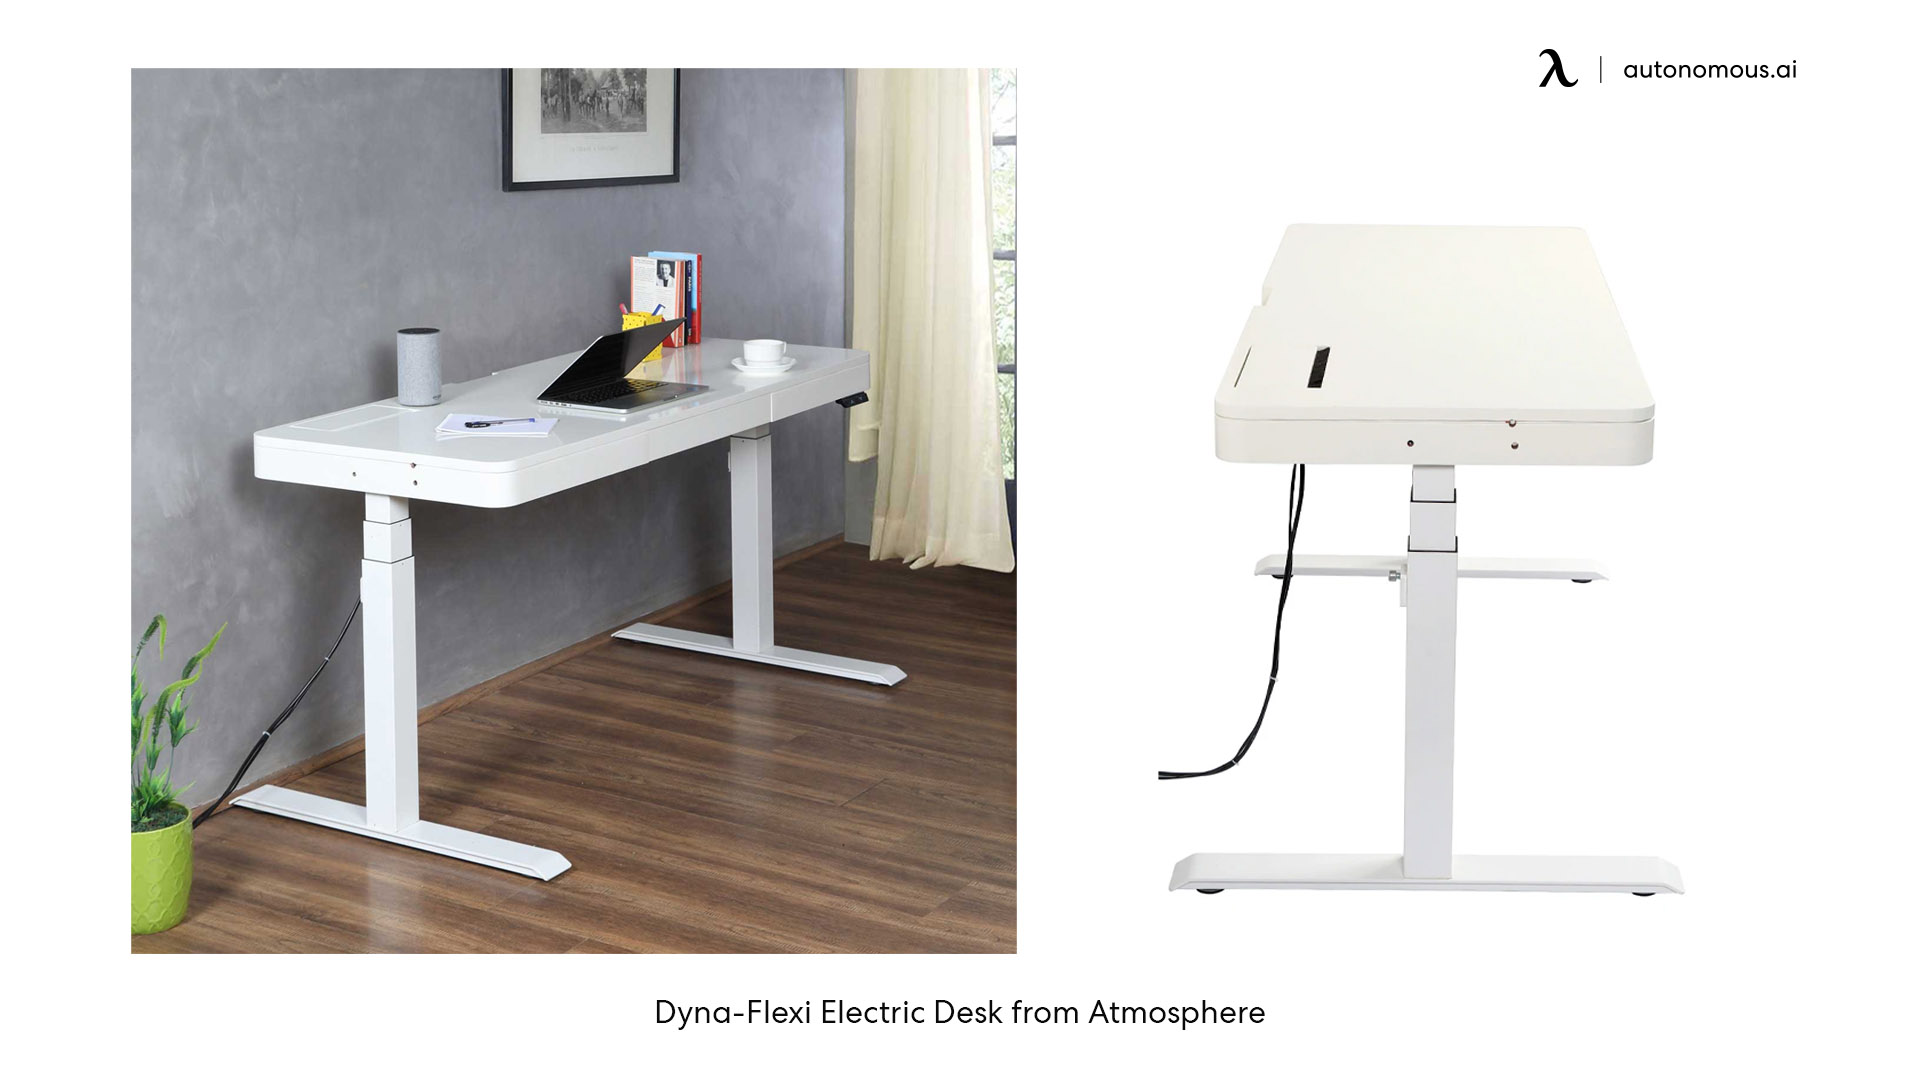 Dyna-Flexi Electric Desk from Atmosphere